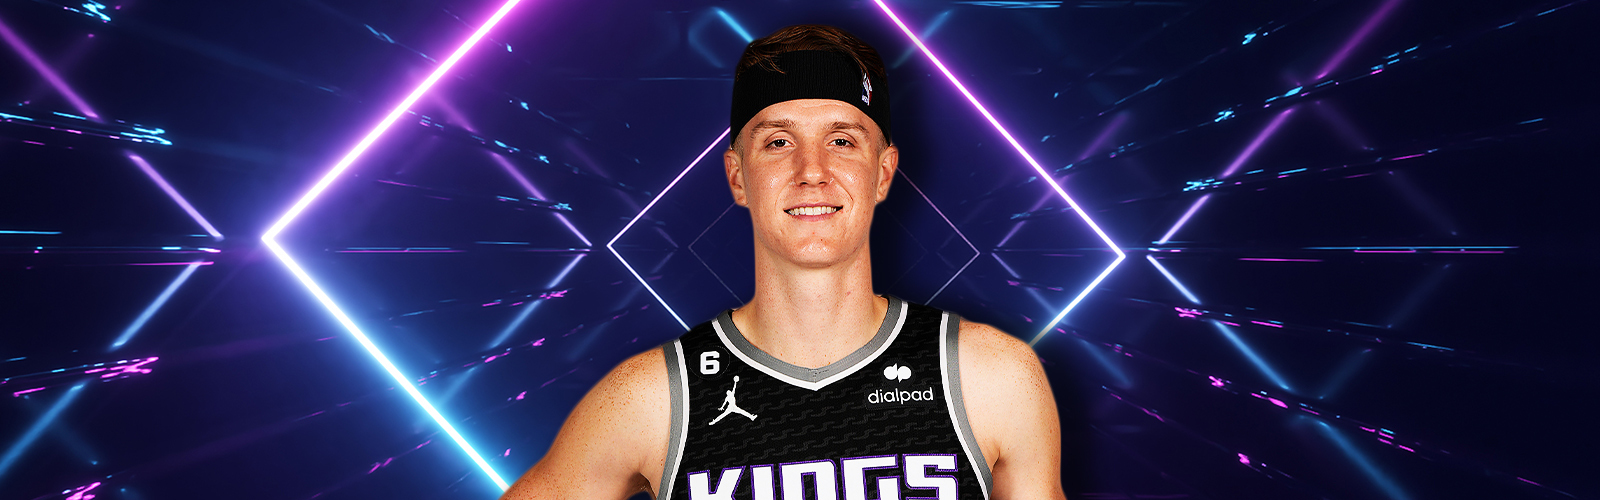 What is Kevin Huerter's salary with the Kings including duration